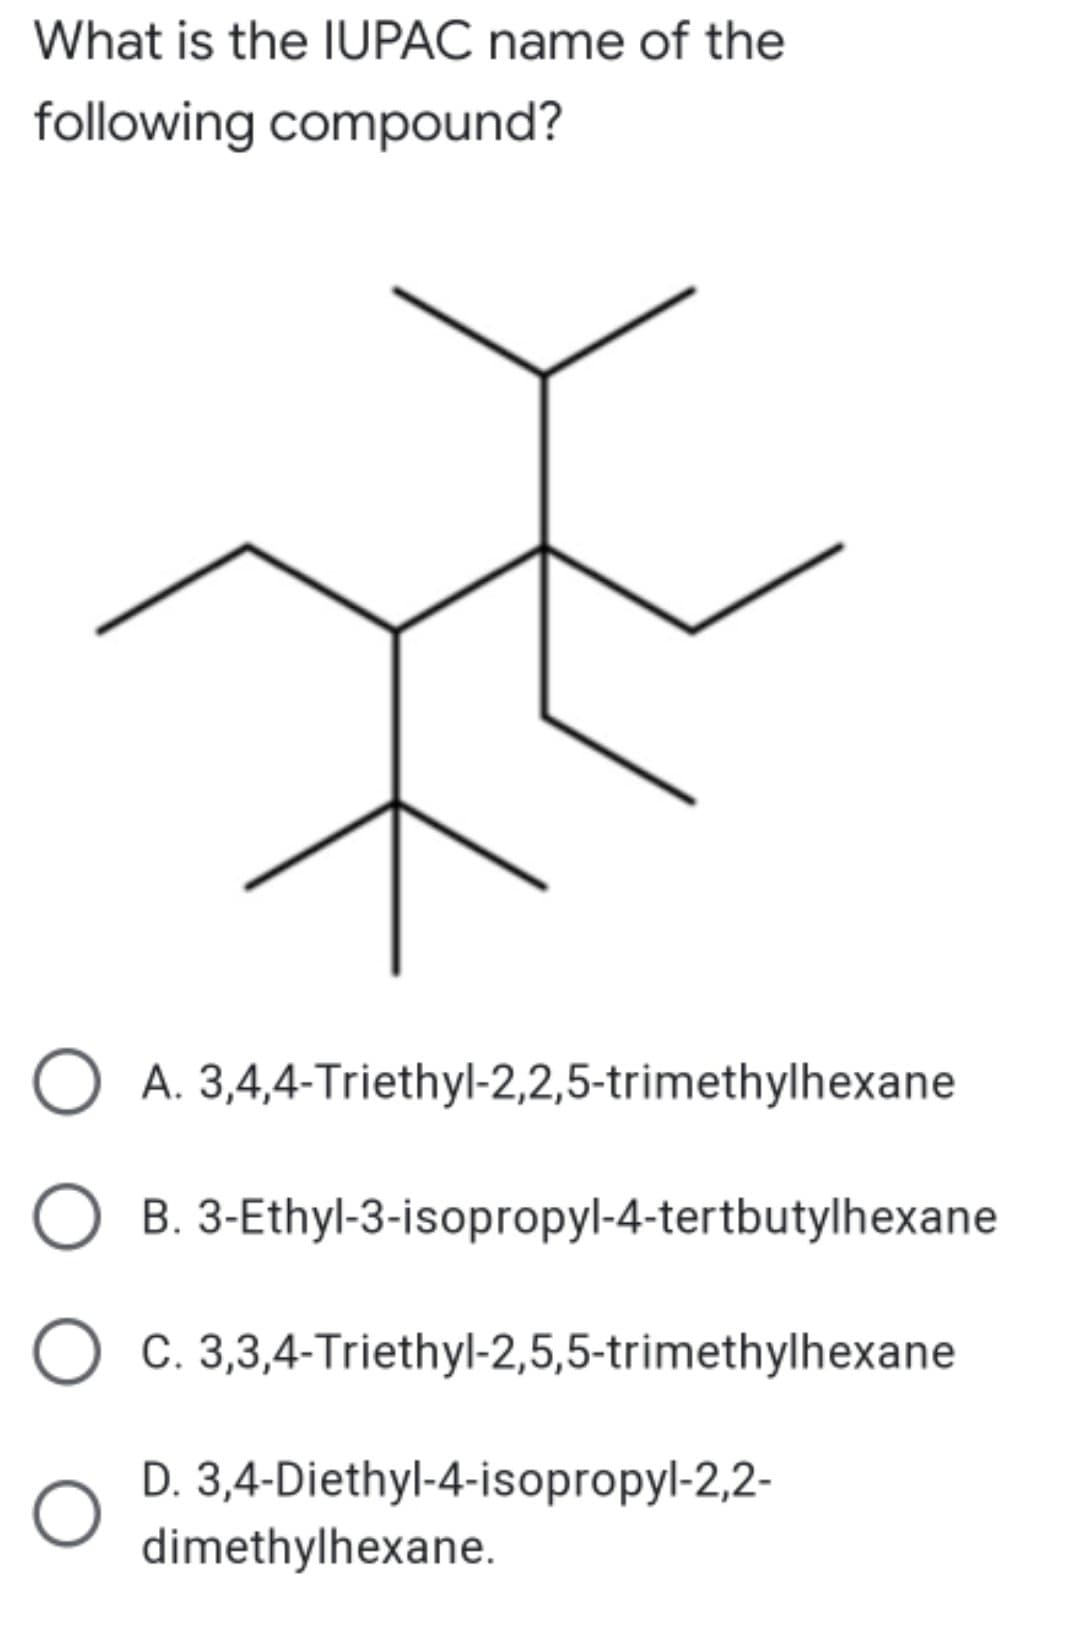 What is the IUPAC name of the
following compound?
O A. 3,4,4-Triethyl-2,2,5-trimethylhexane
B. 3-Ethyl-3-isopropyl-4-tertbutylhexane
O c. 3,3,4-Triethyl-2,5,5-trimethylhexane
D. 3,4-Diethyl-4-isopropyl-2,2-
dimethylhexane.
